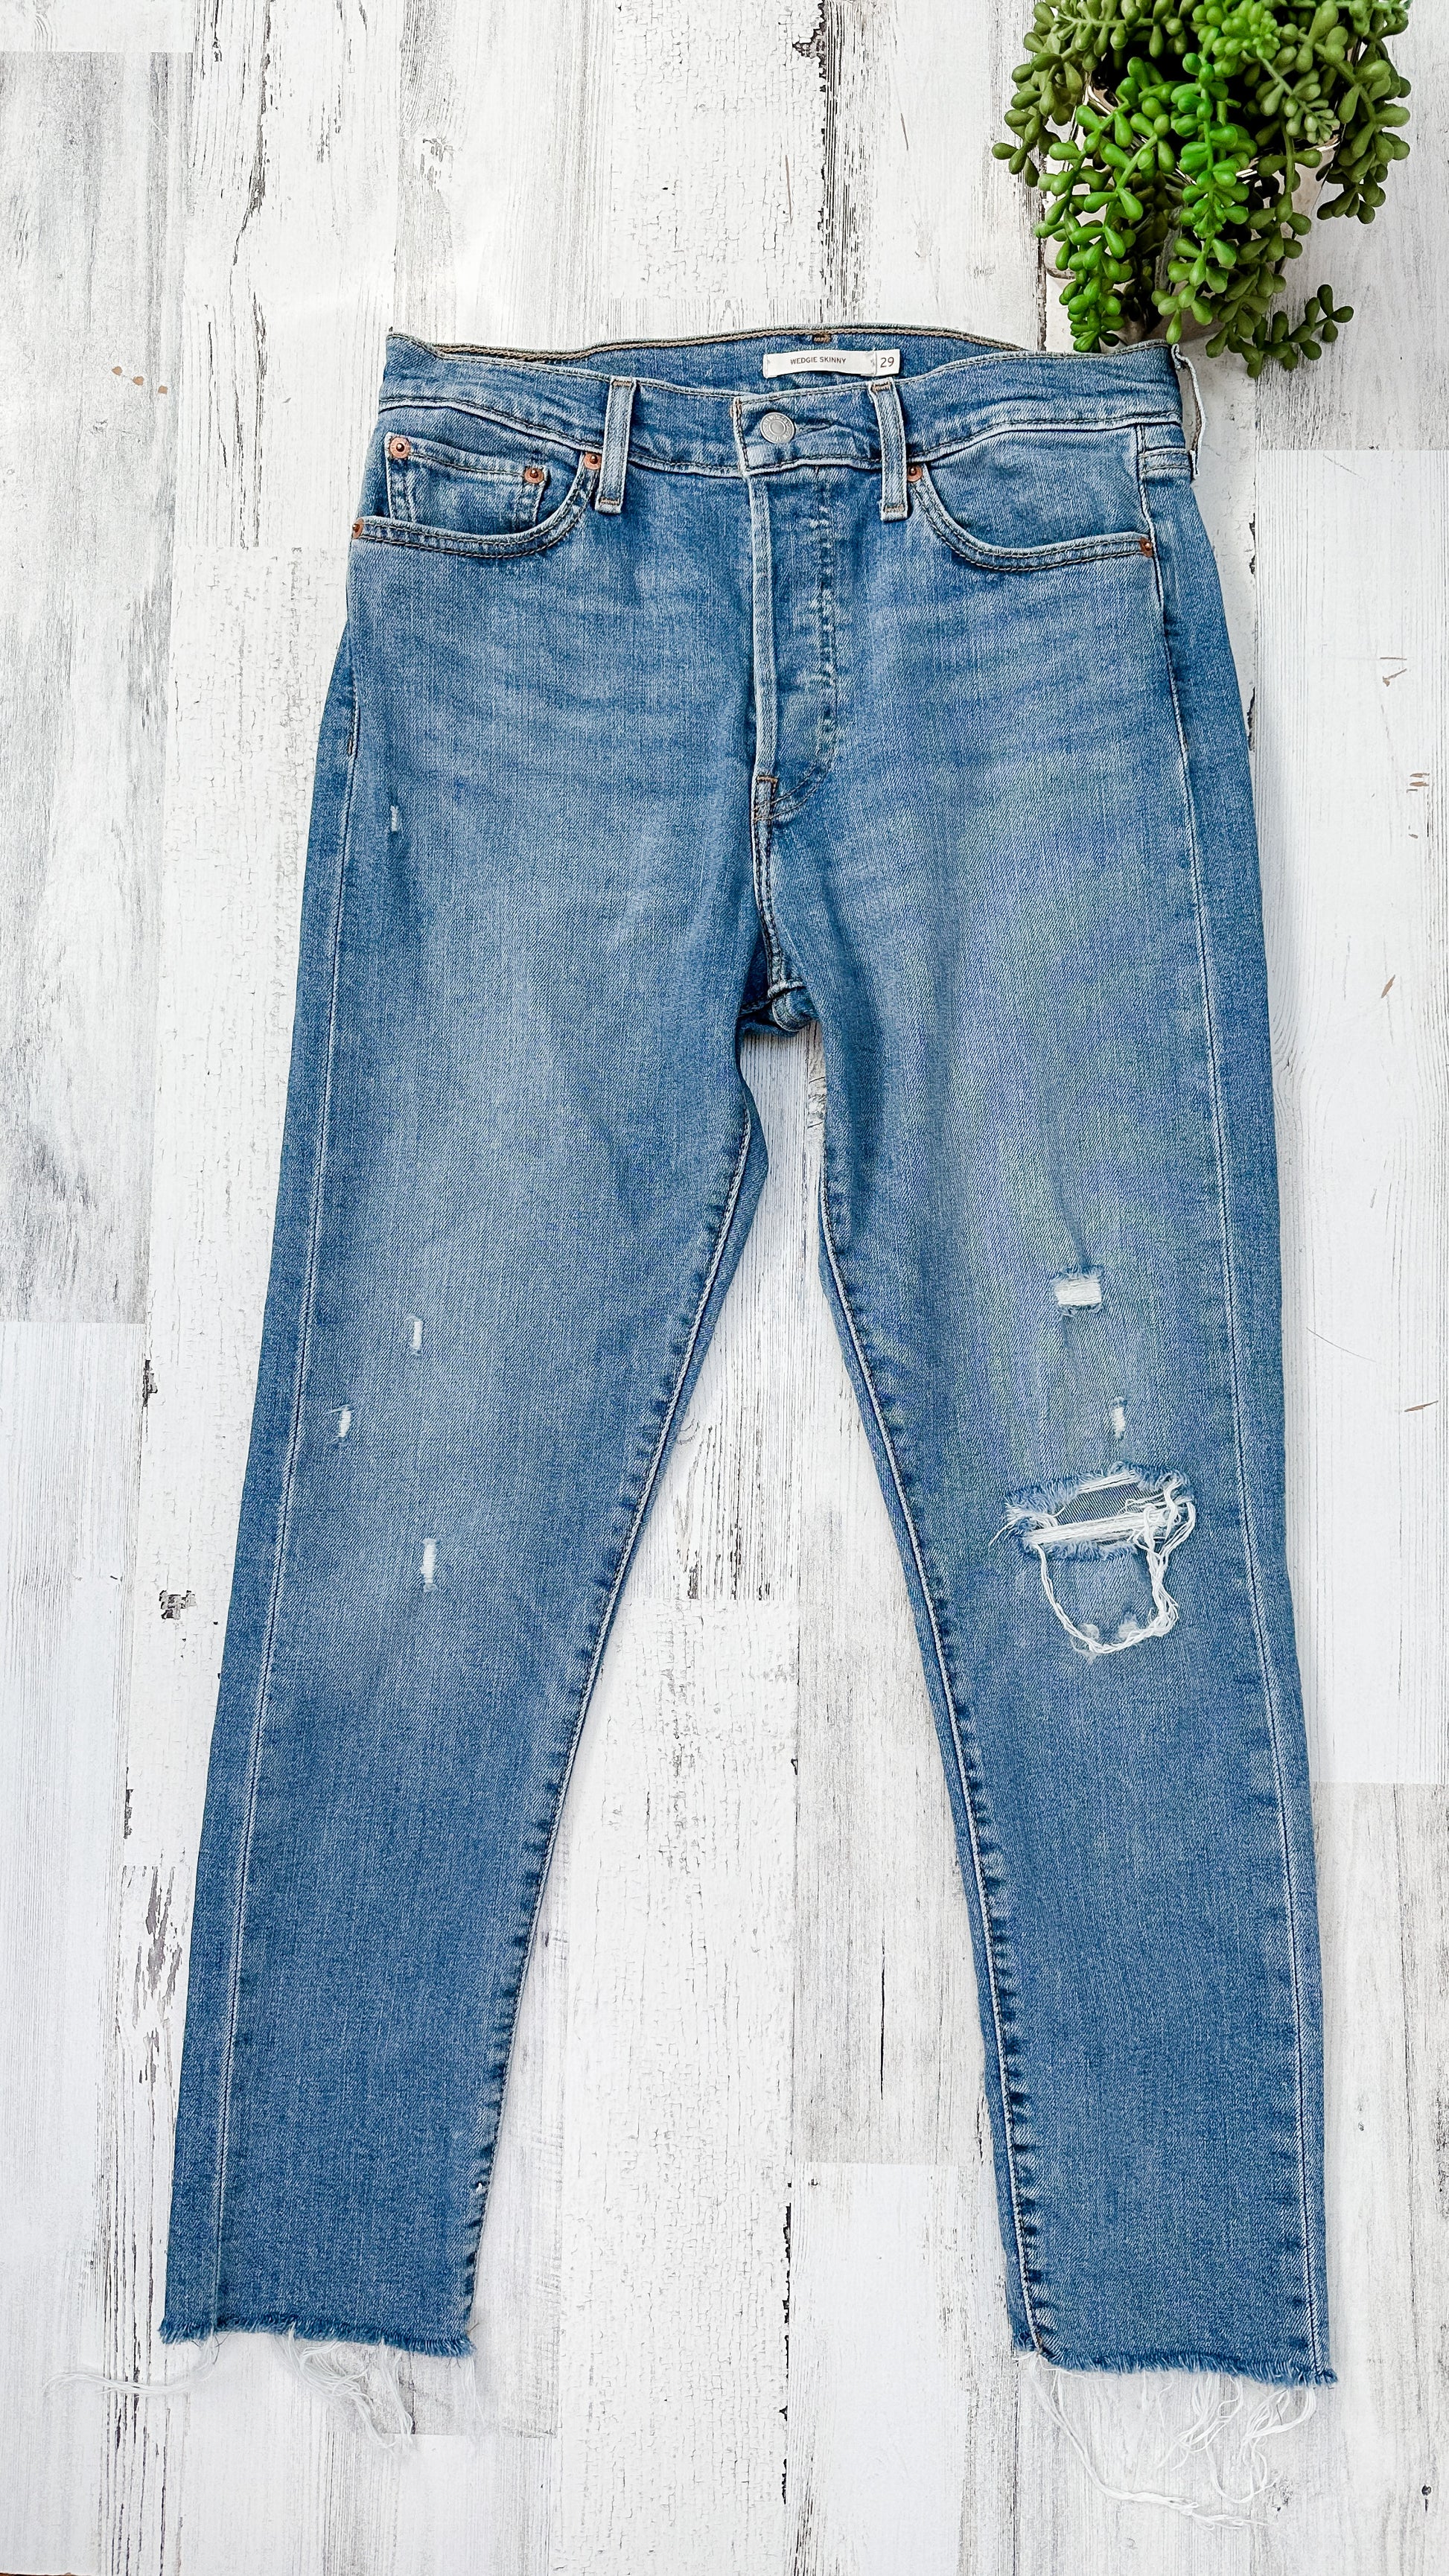 Levi's Wedgie Skinny in Blue Spice Distressed Jeans (29 or 8) – The  Wandering Wardrobe Truck